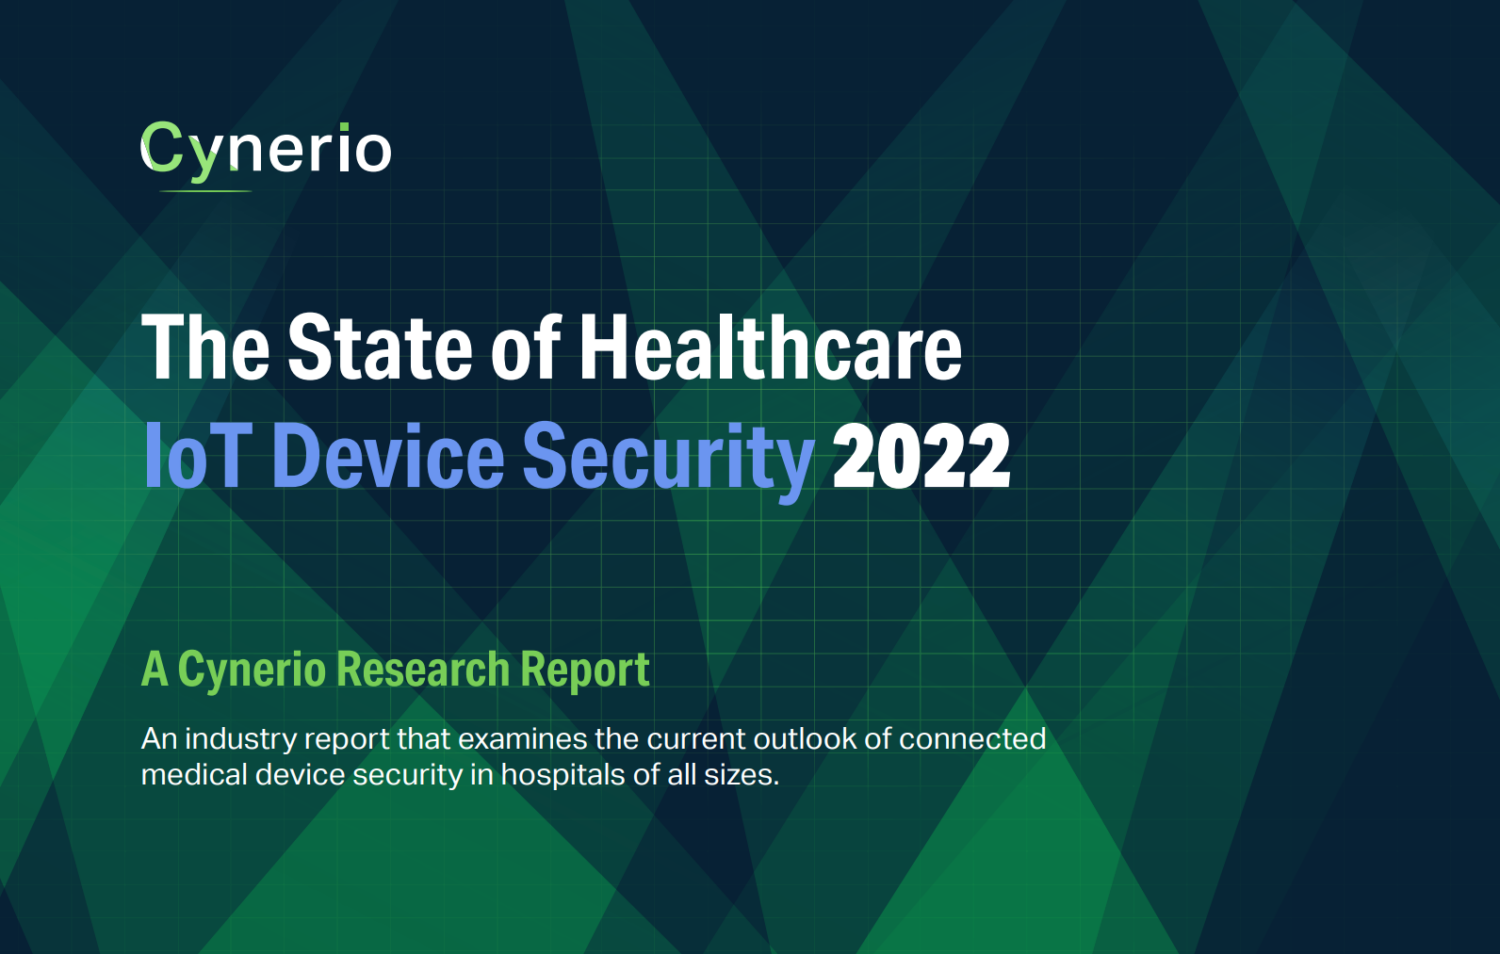 Critical Medical Device Risks Continue to Threaten Hospital Security & Patient Safety